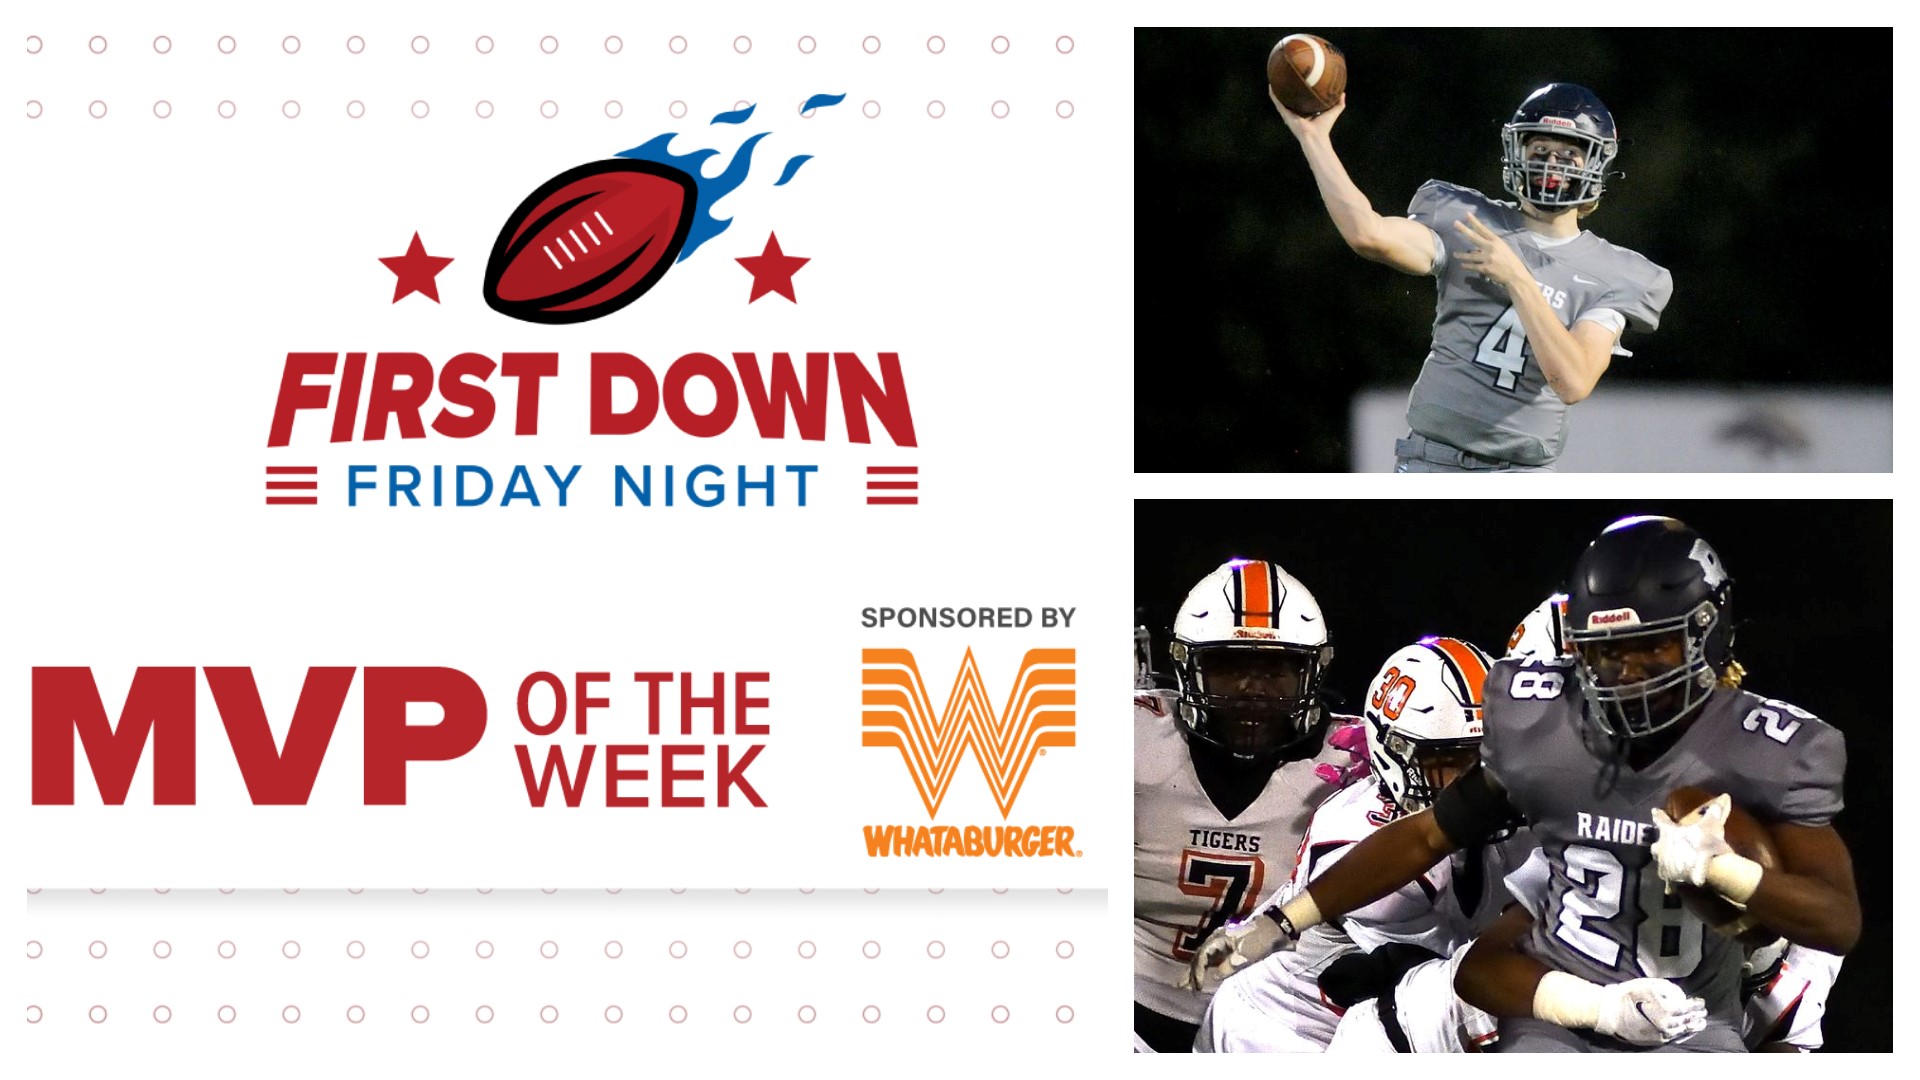 Randolph standouts Nic Strong & Andrew Hunter played a huge role in the Raiders win over Madison Academy. For their efforts, they were awarded Co-MVPs of the week.